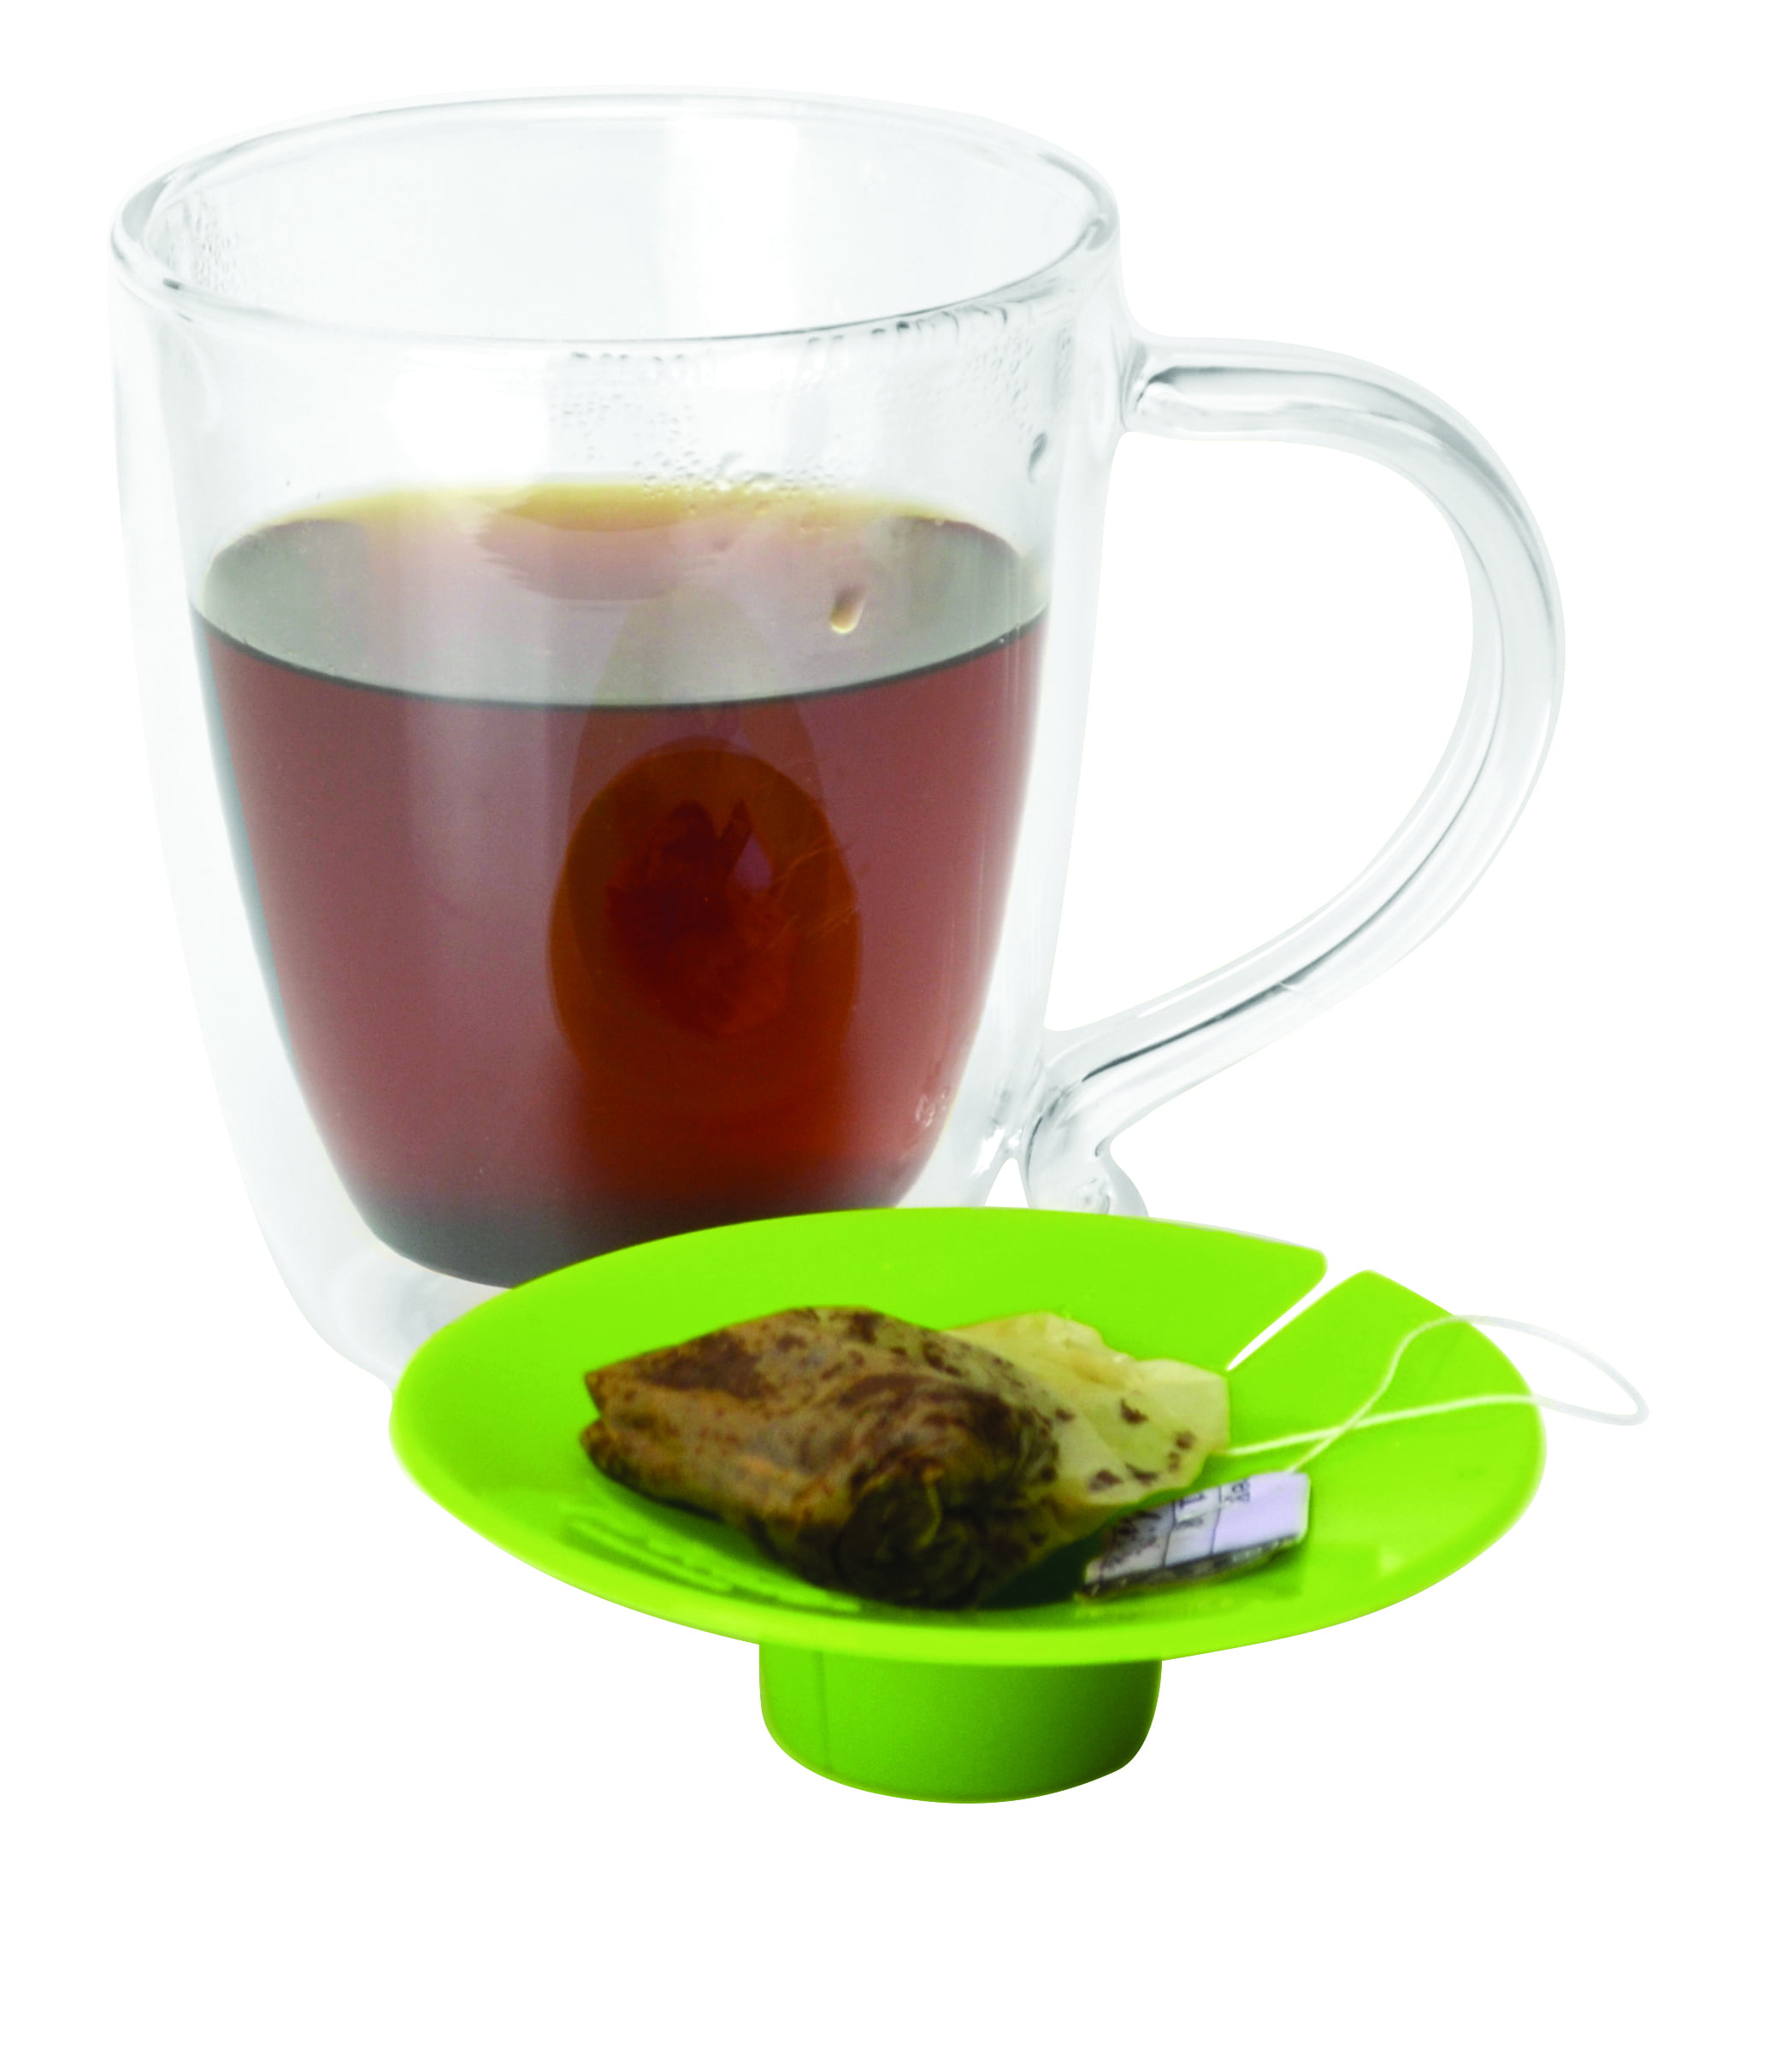 Primula Tea Bag Buddy Green New in Package Microwave and Dishwasher Safe